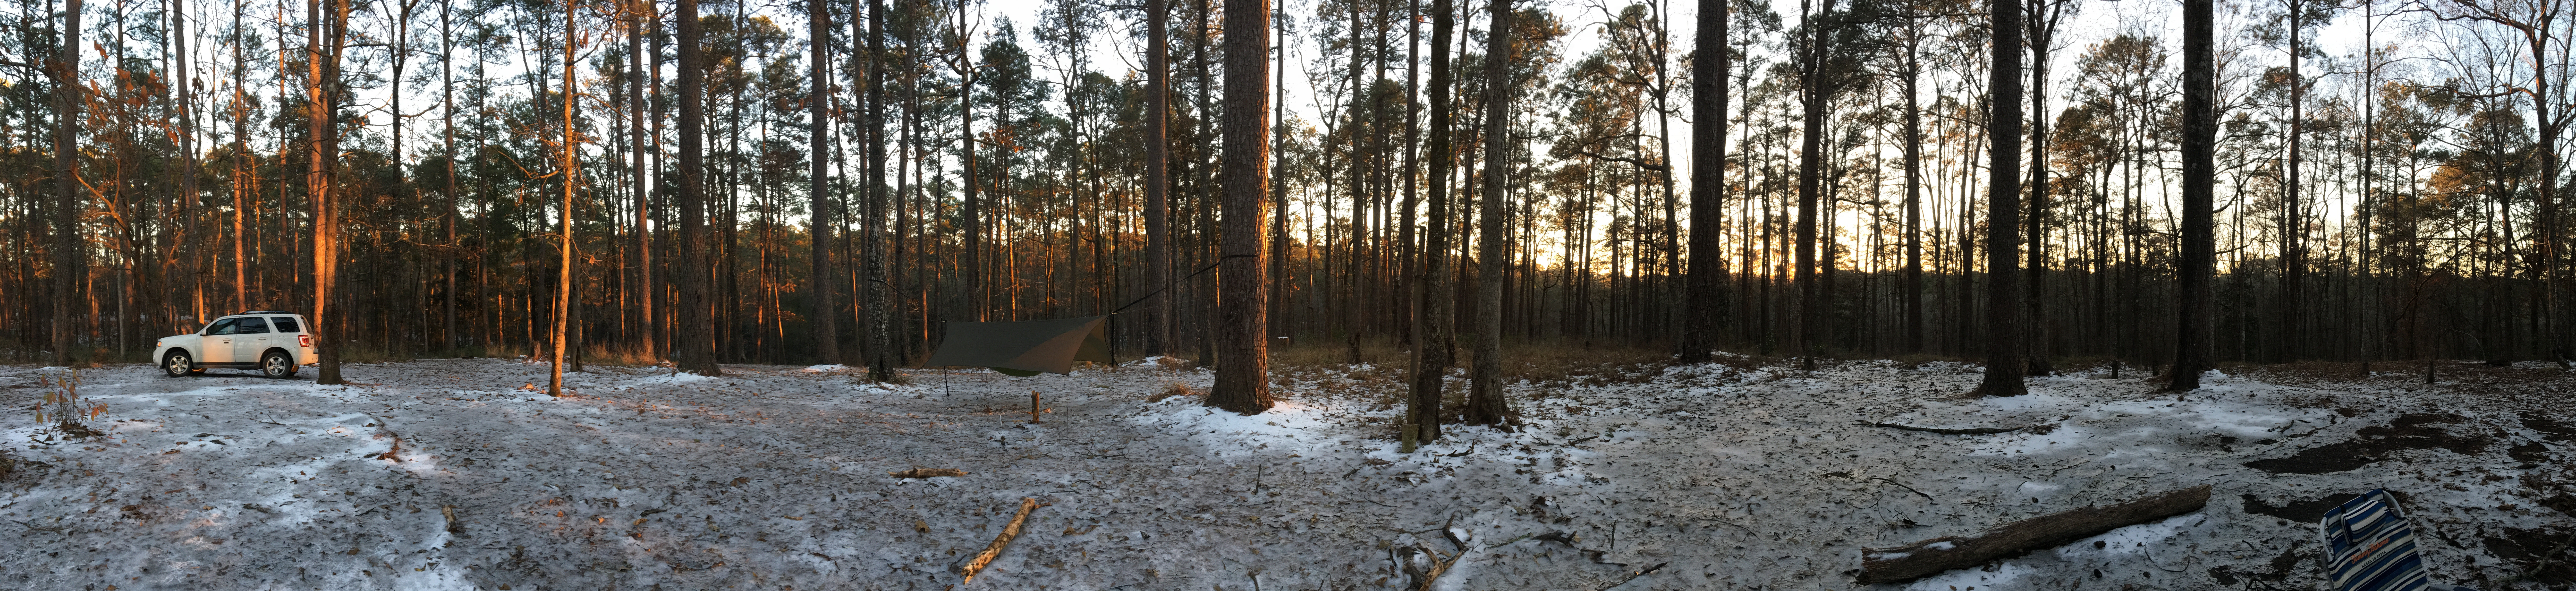 Camper submitted image from Clear Springs Recreation Area - 2